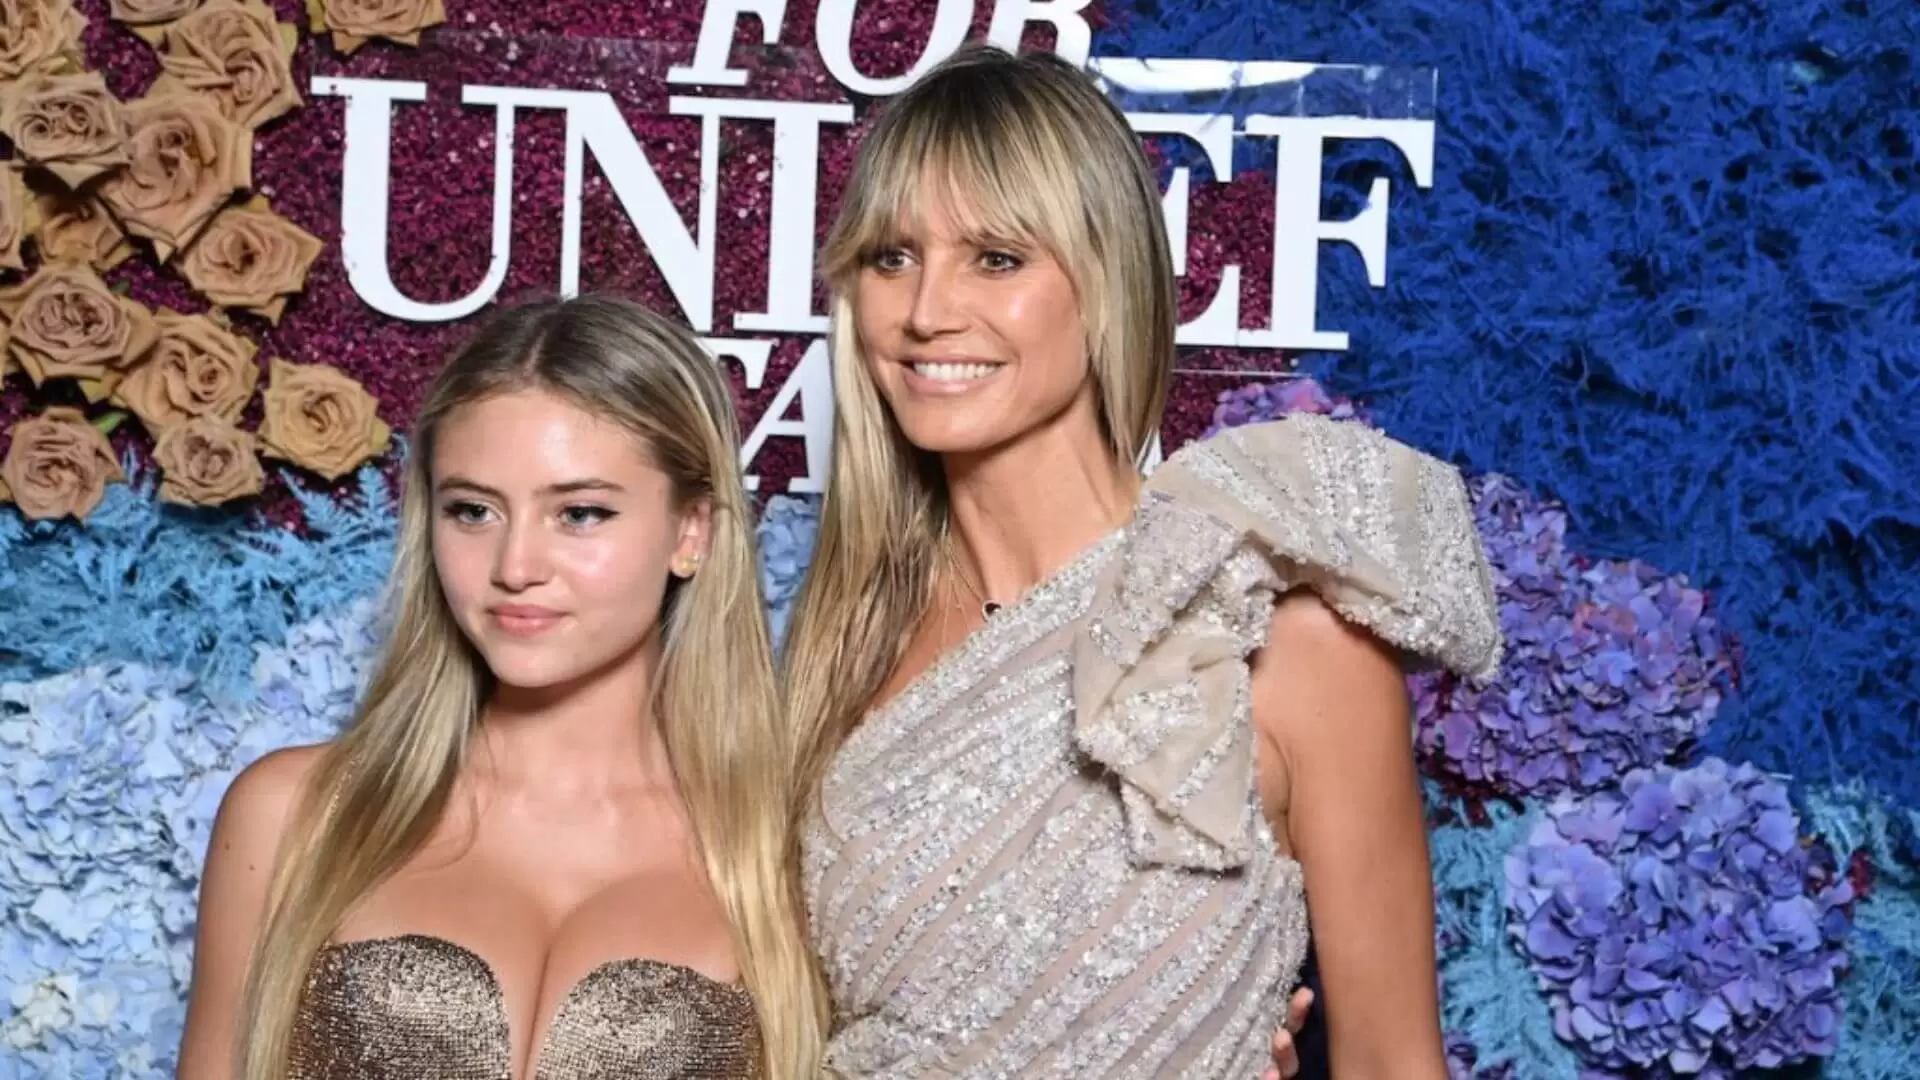 Tired of comparisons What Heidi Klum’s daughter did to avoid being a copy of her mother (1)